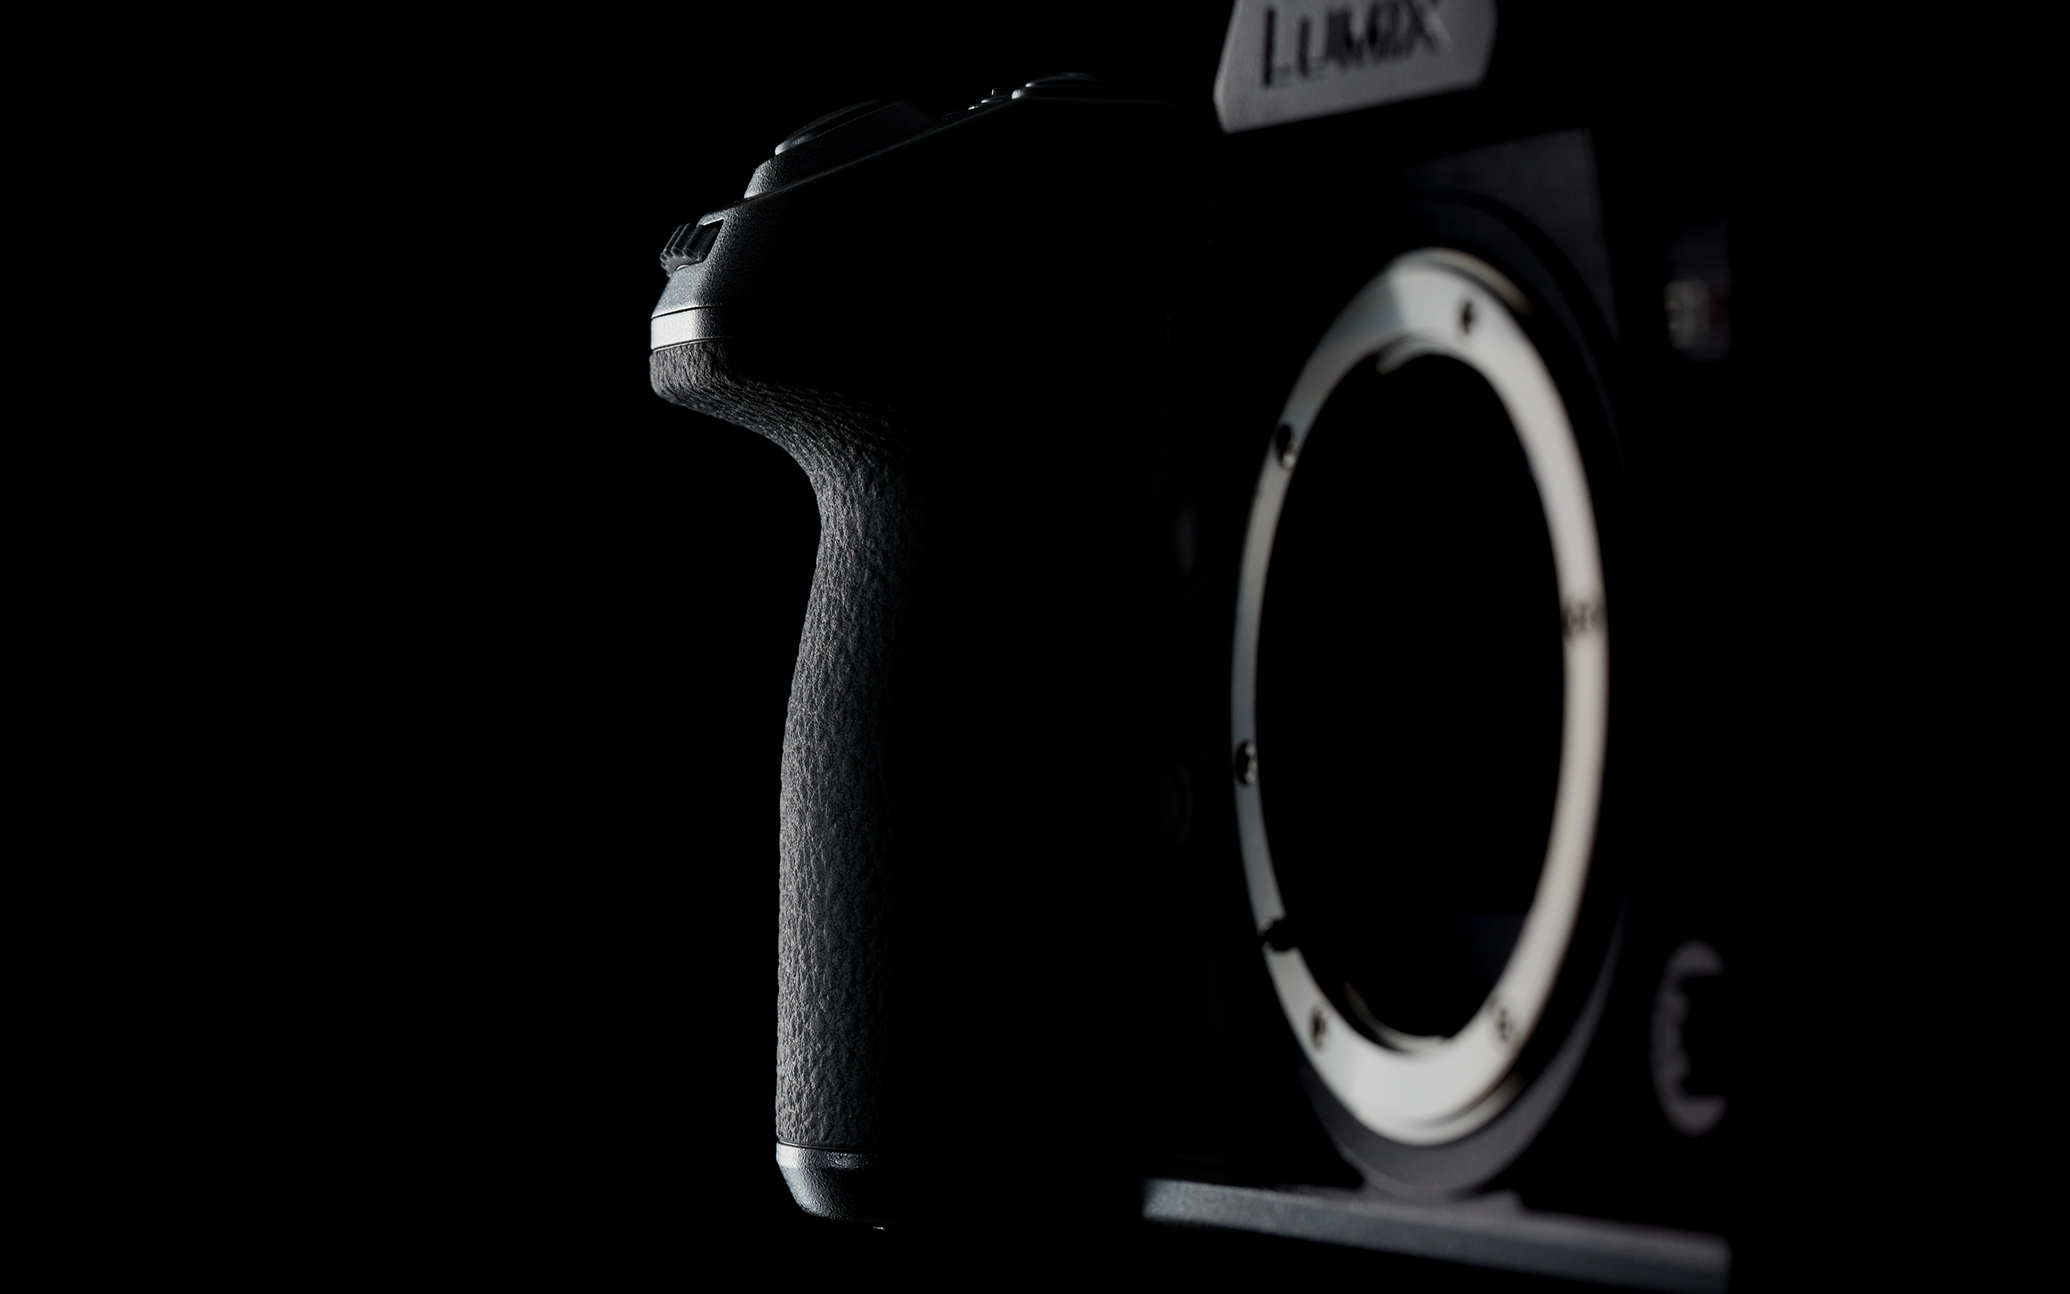 photo:Side view of grip of Digital camera LUMIX